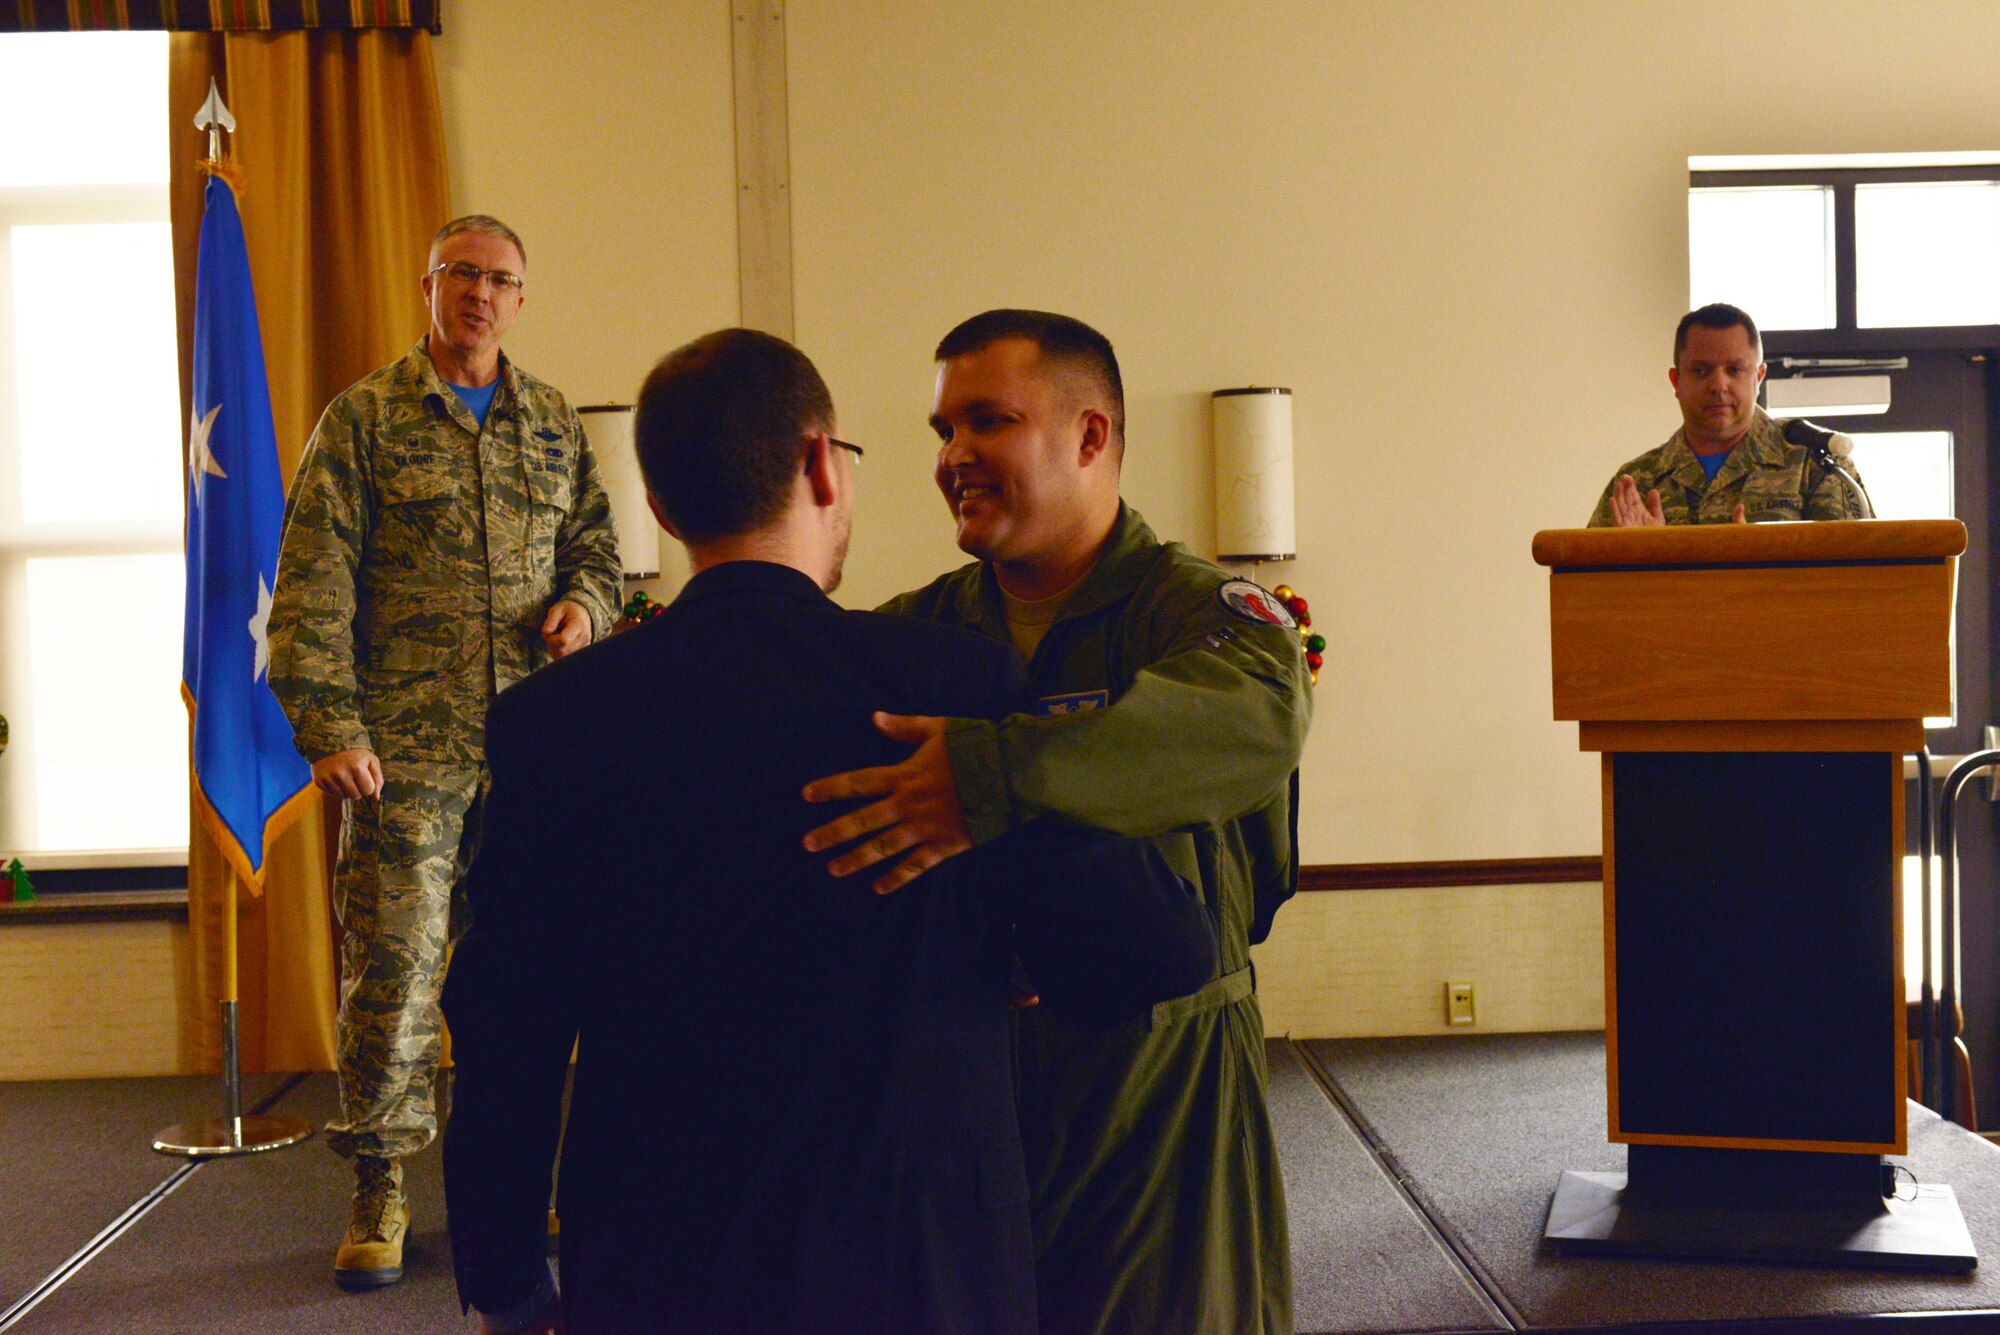 Jack Ewald embraces New York Air National Guardsman Tech. Sgt. Jason Oehlbeck as they meet for the first time at Niagara Falls Air Reserve Station December 6, 2015. Oehlbeck performed CPR for 18 minutes to save the life of Ewald at a hotel in Syracuse, NY. (U.S. Air National Guard Photo/Senior Master Sgt. Ray Lloyd)